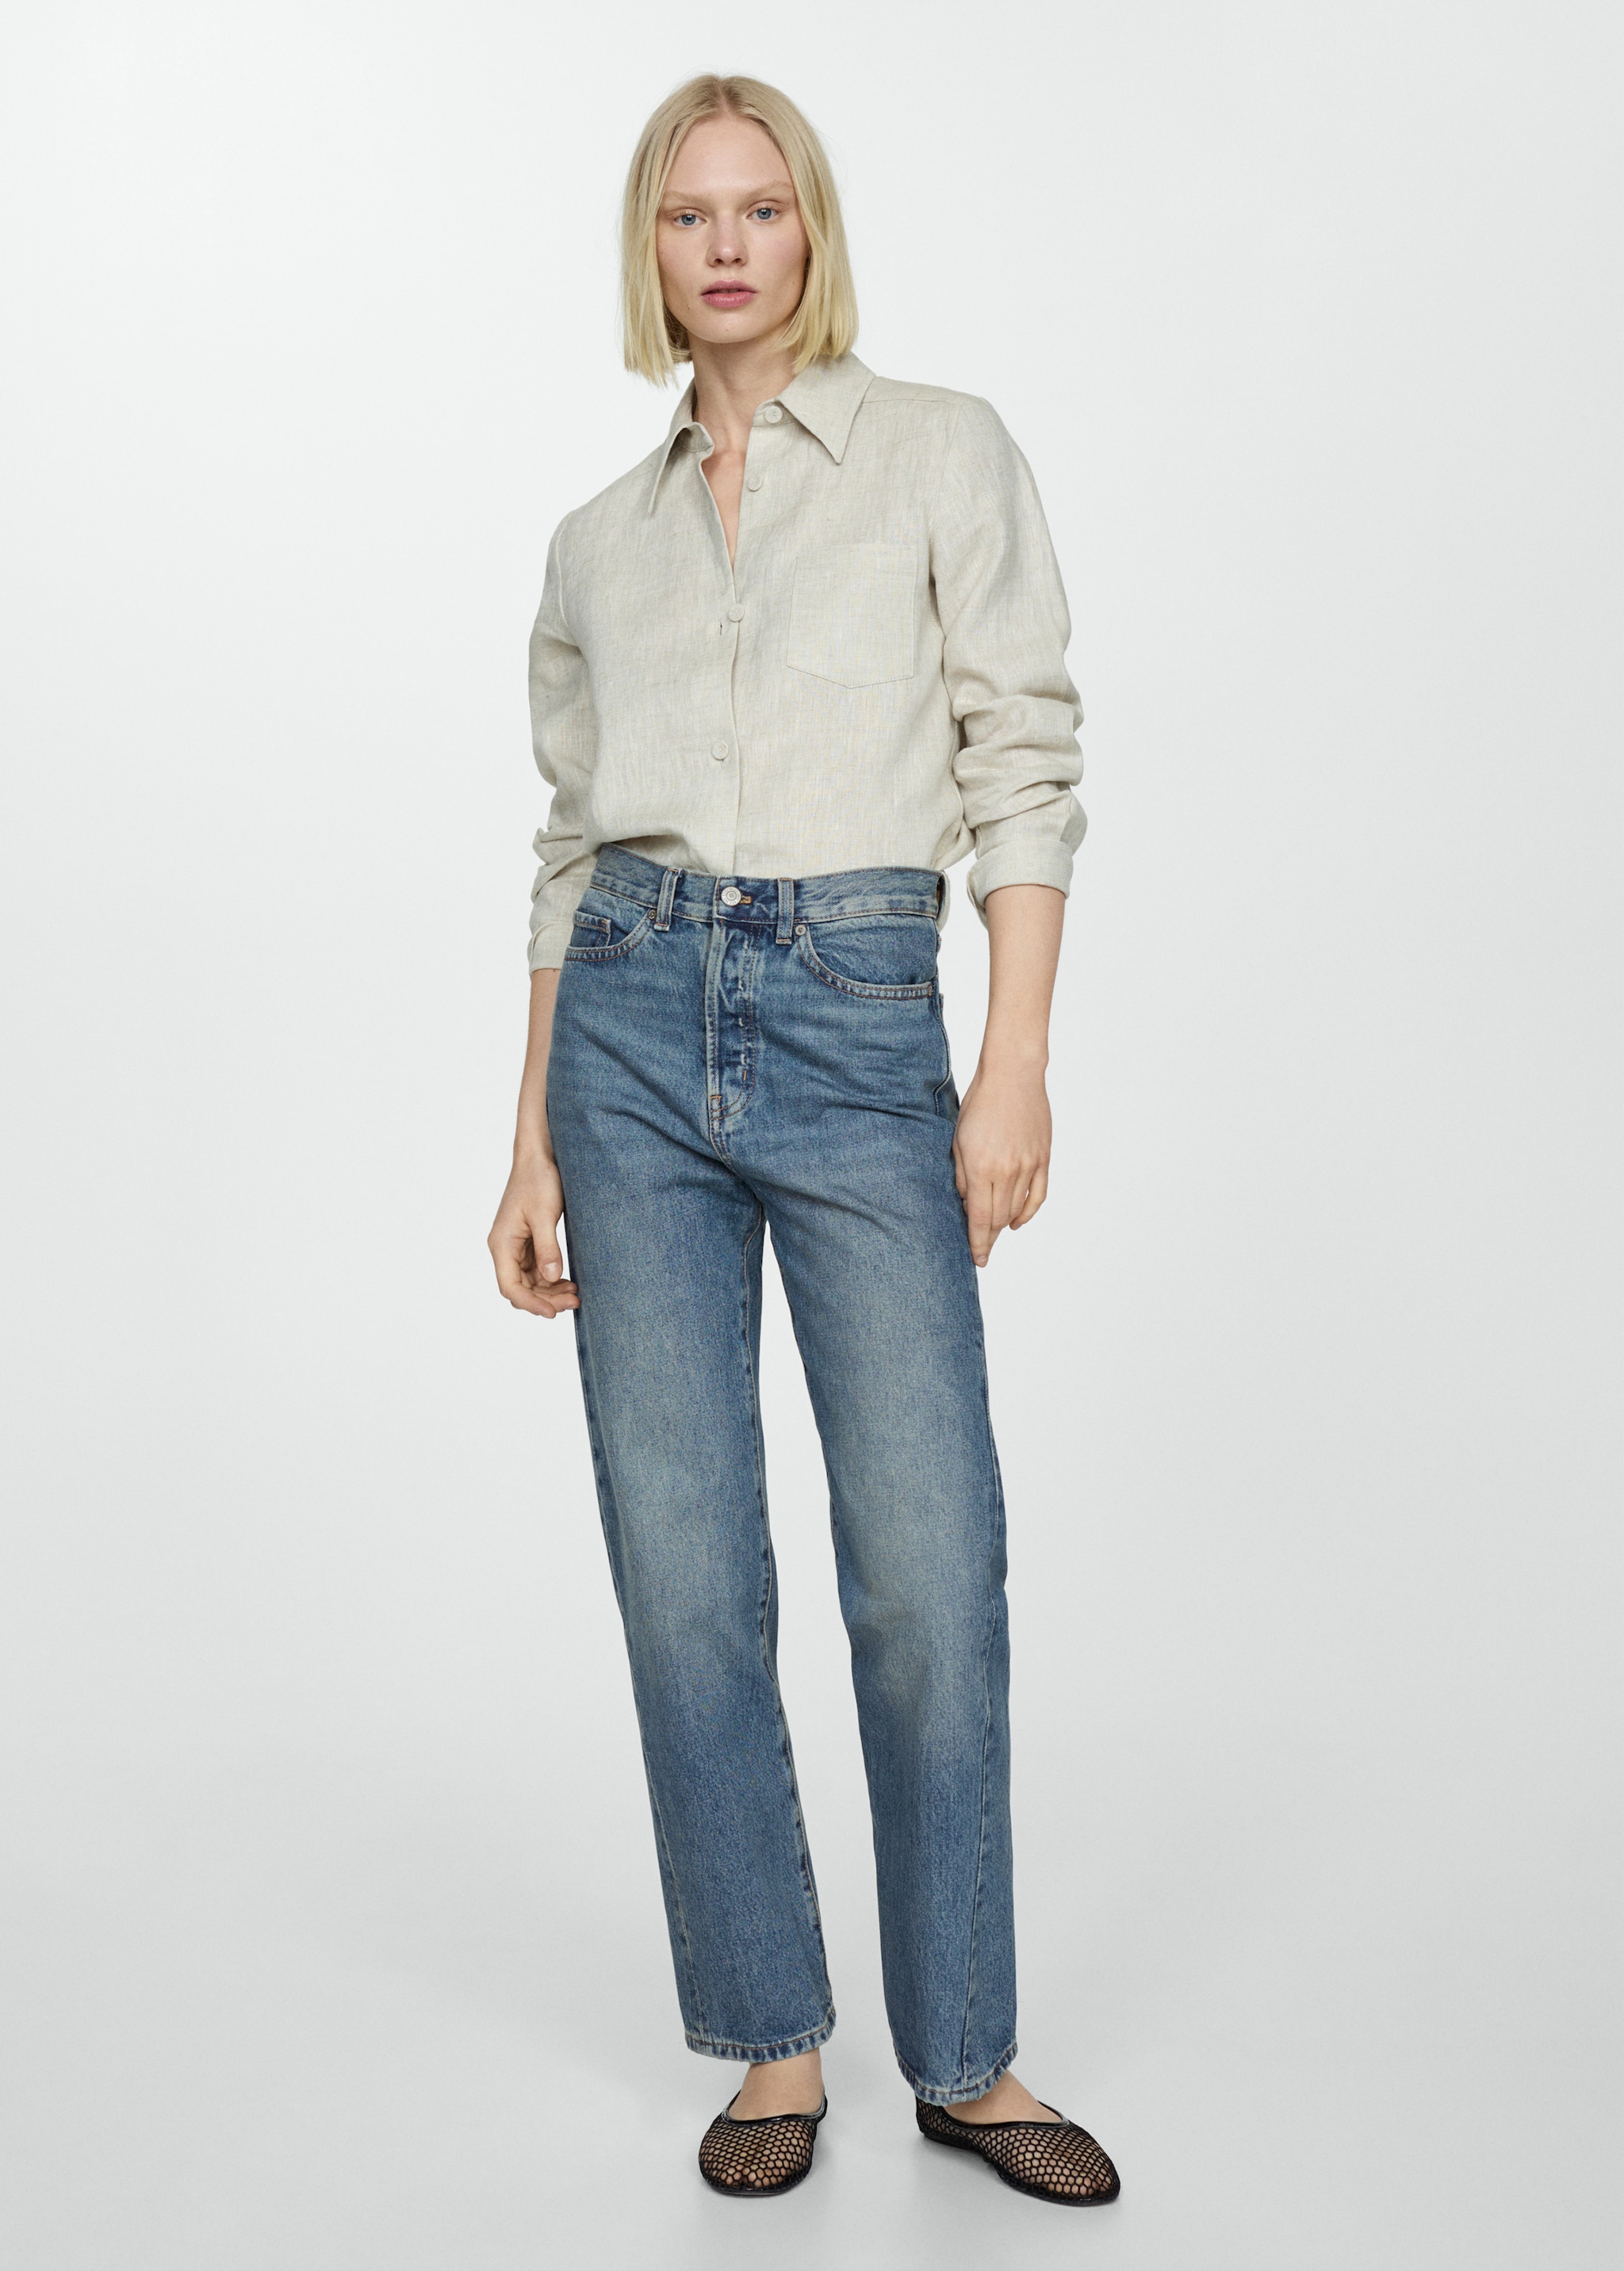 Straight jeans with forward seams - General plane